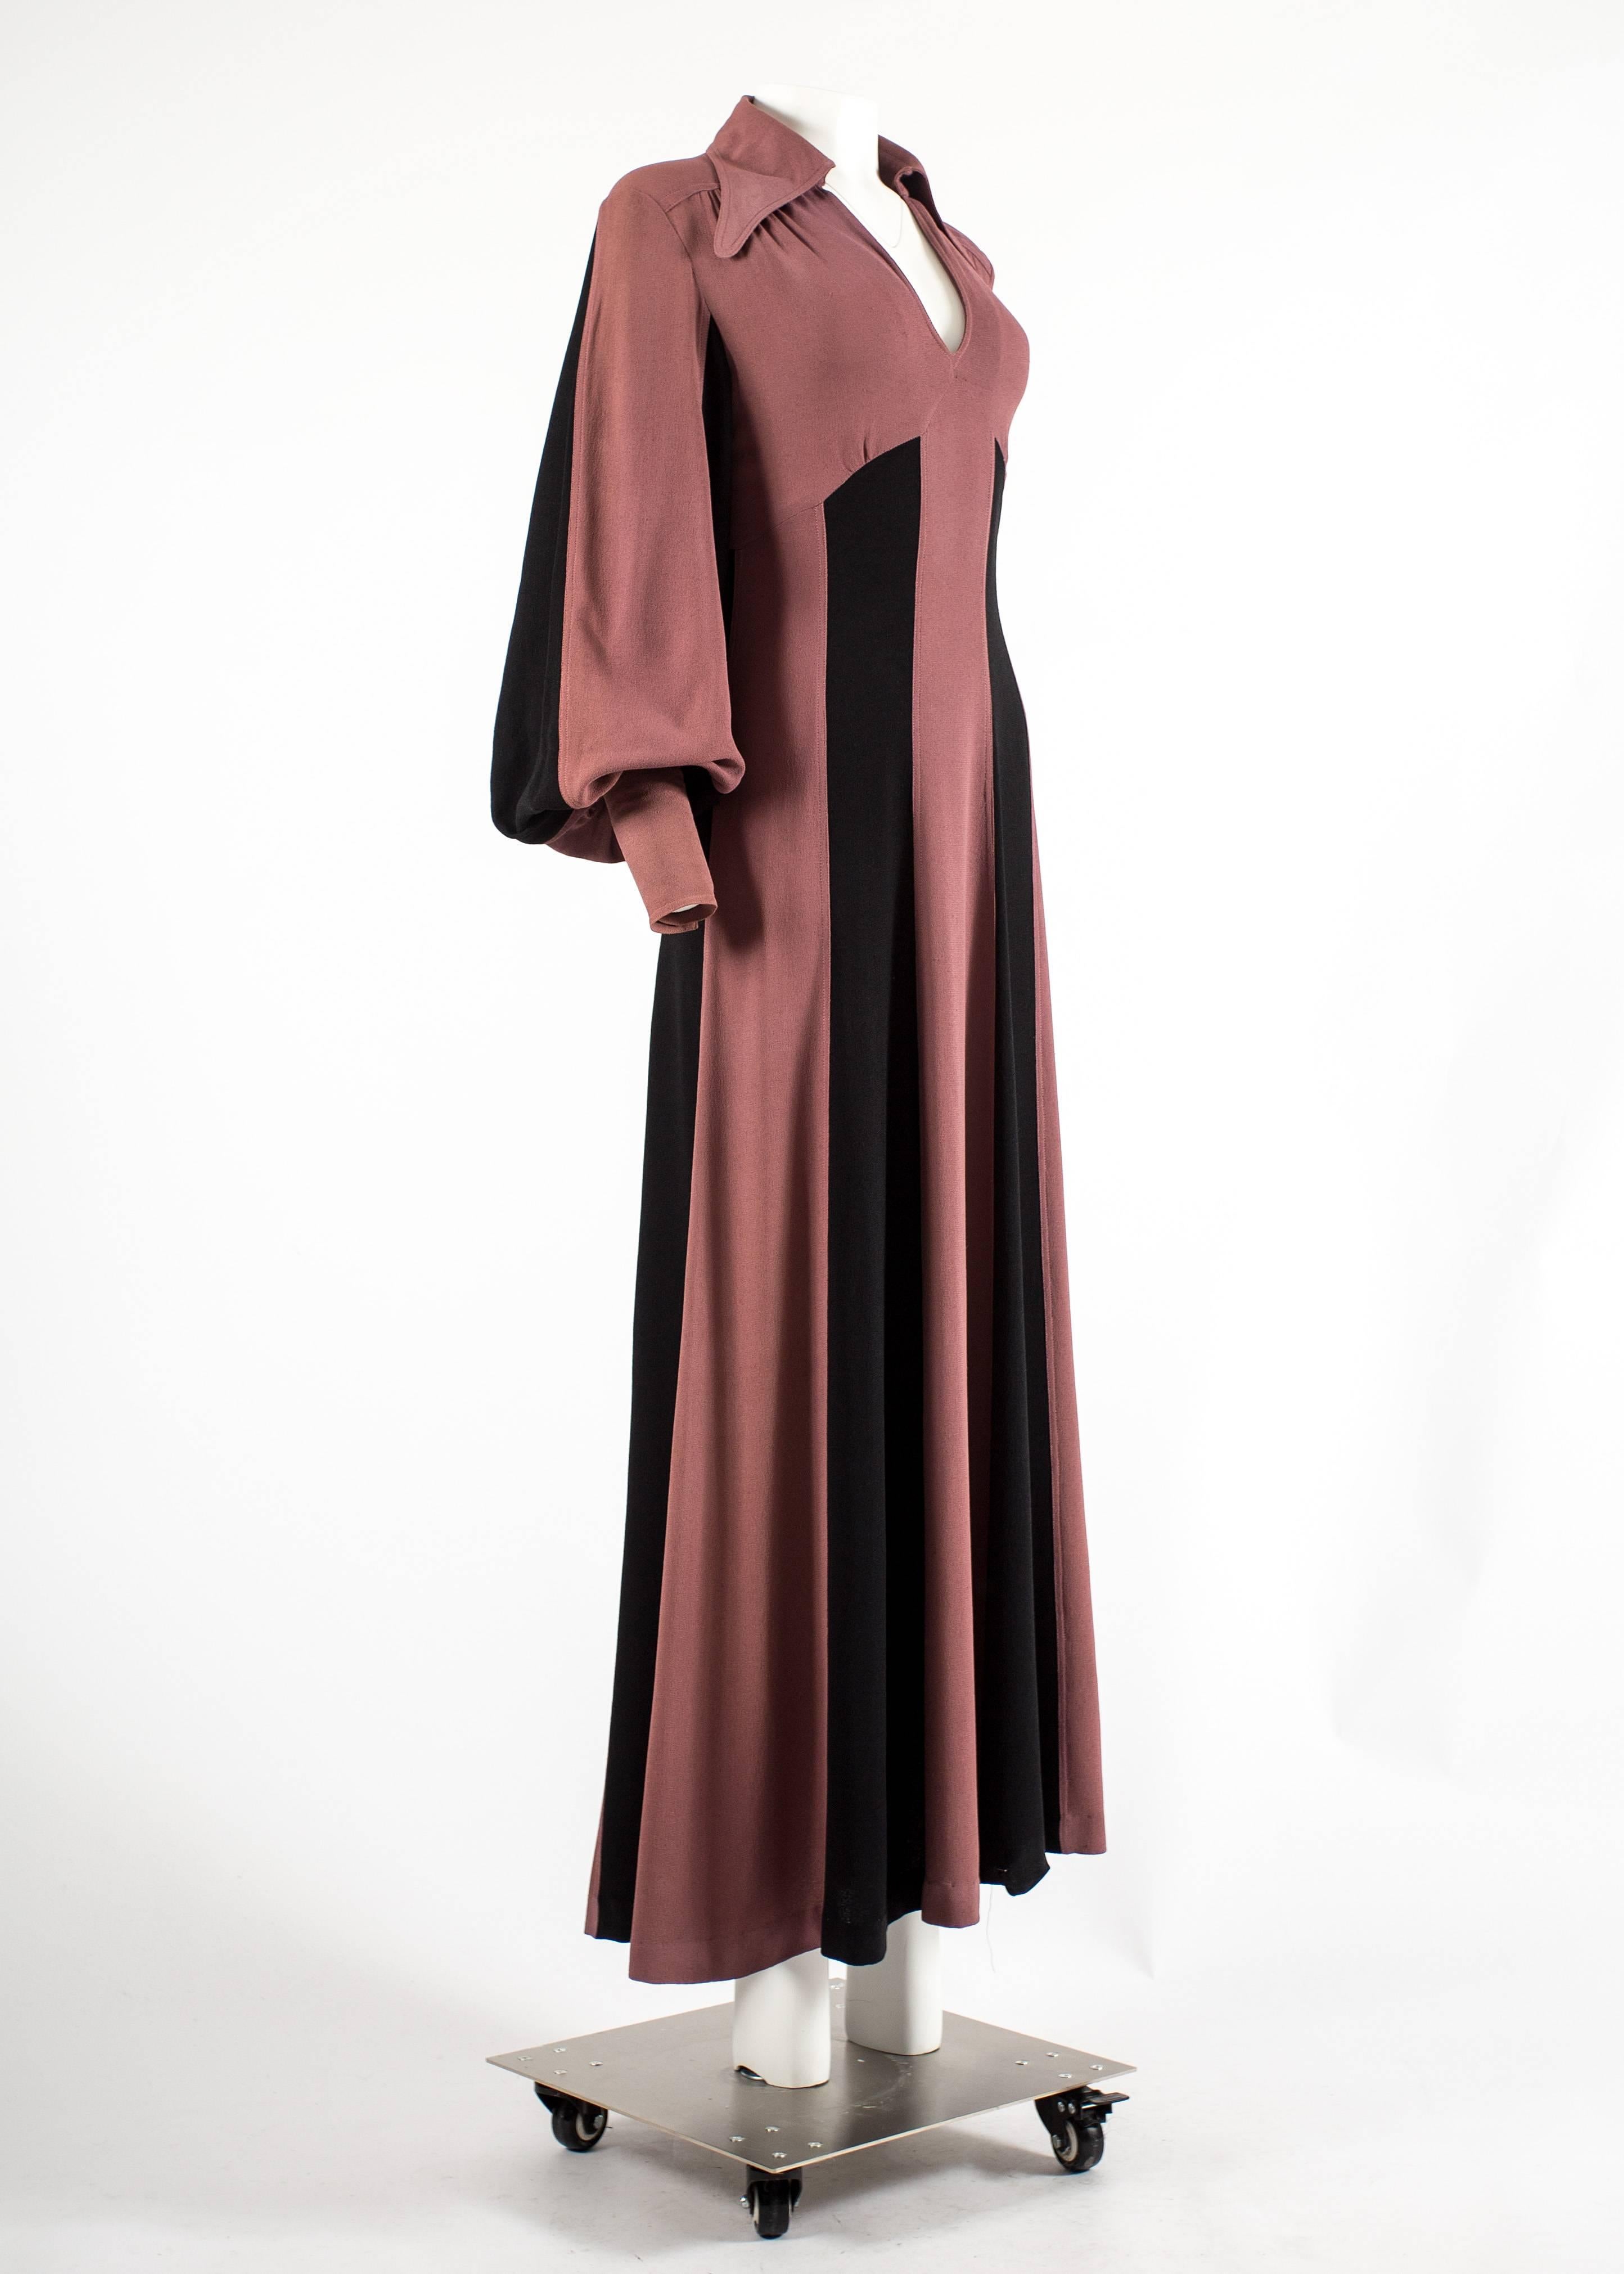 Alice Pollock 1970 moss crepe striped mauve and black evening dress

- billowing poet sleeves
- pointed collar
- zip fastening 